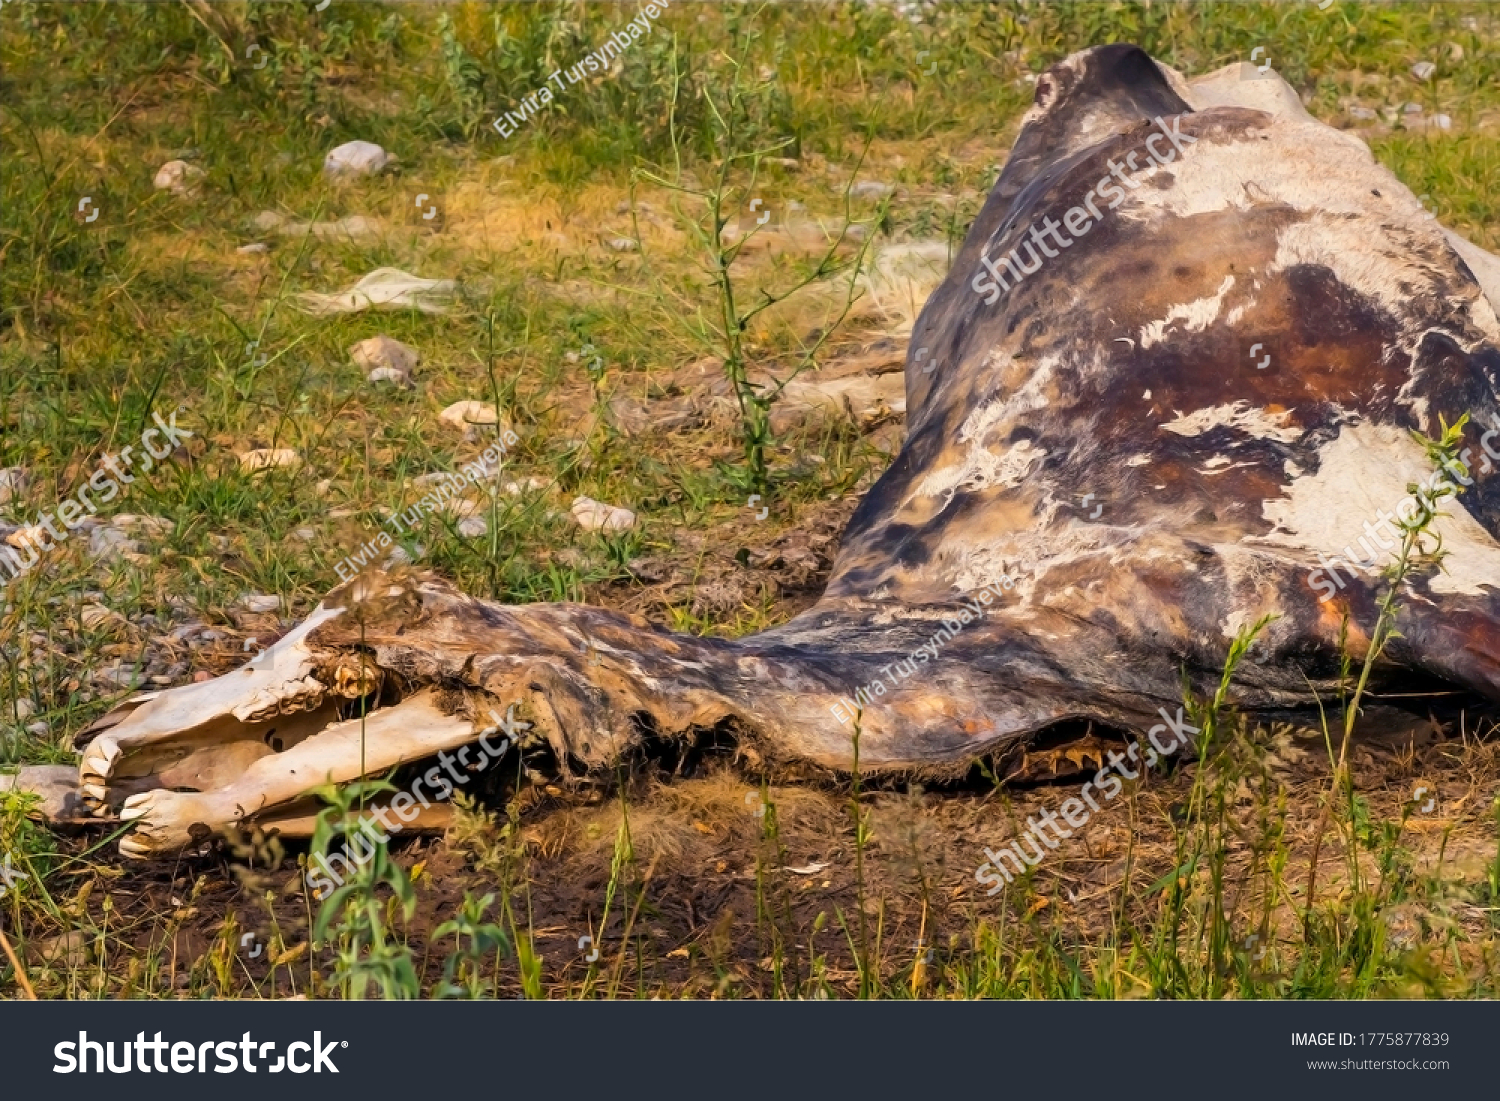 The corpse of a horse in the wild. The body of a dead horse on the ground in the grass. The corpse of a horse decays. Cadaverous spots on the skin. Skeleton of a horse. Bones, hair next to the corpse #1775877839